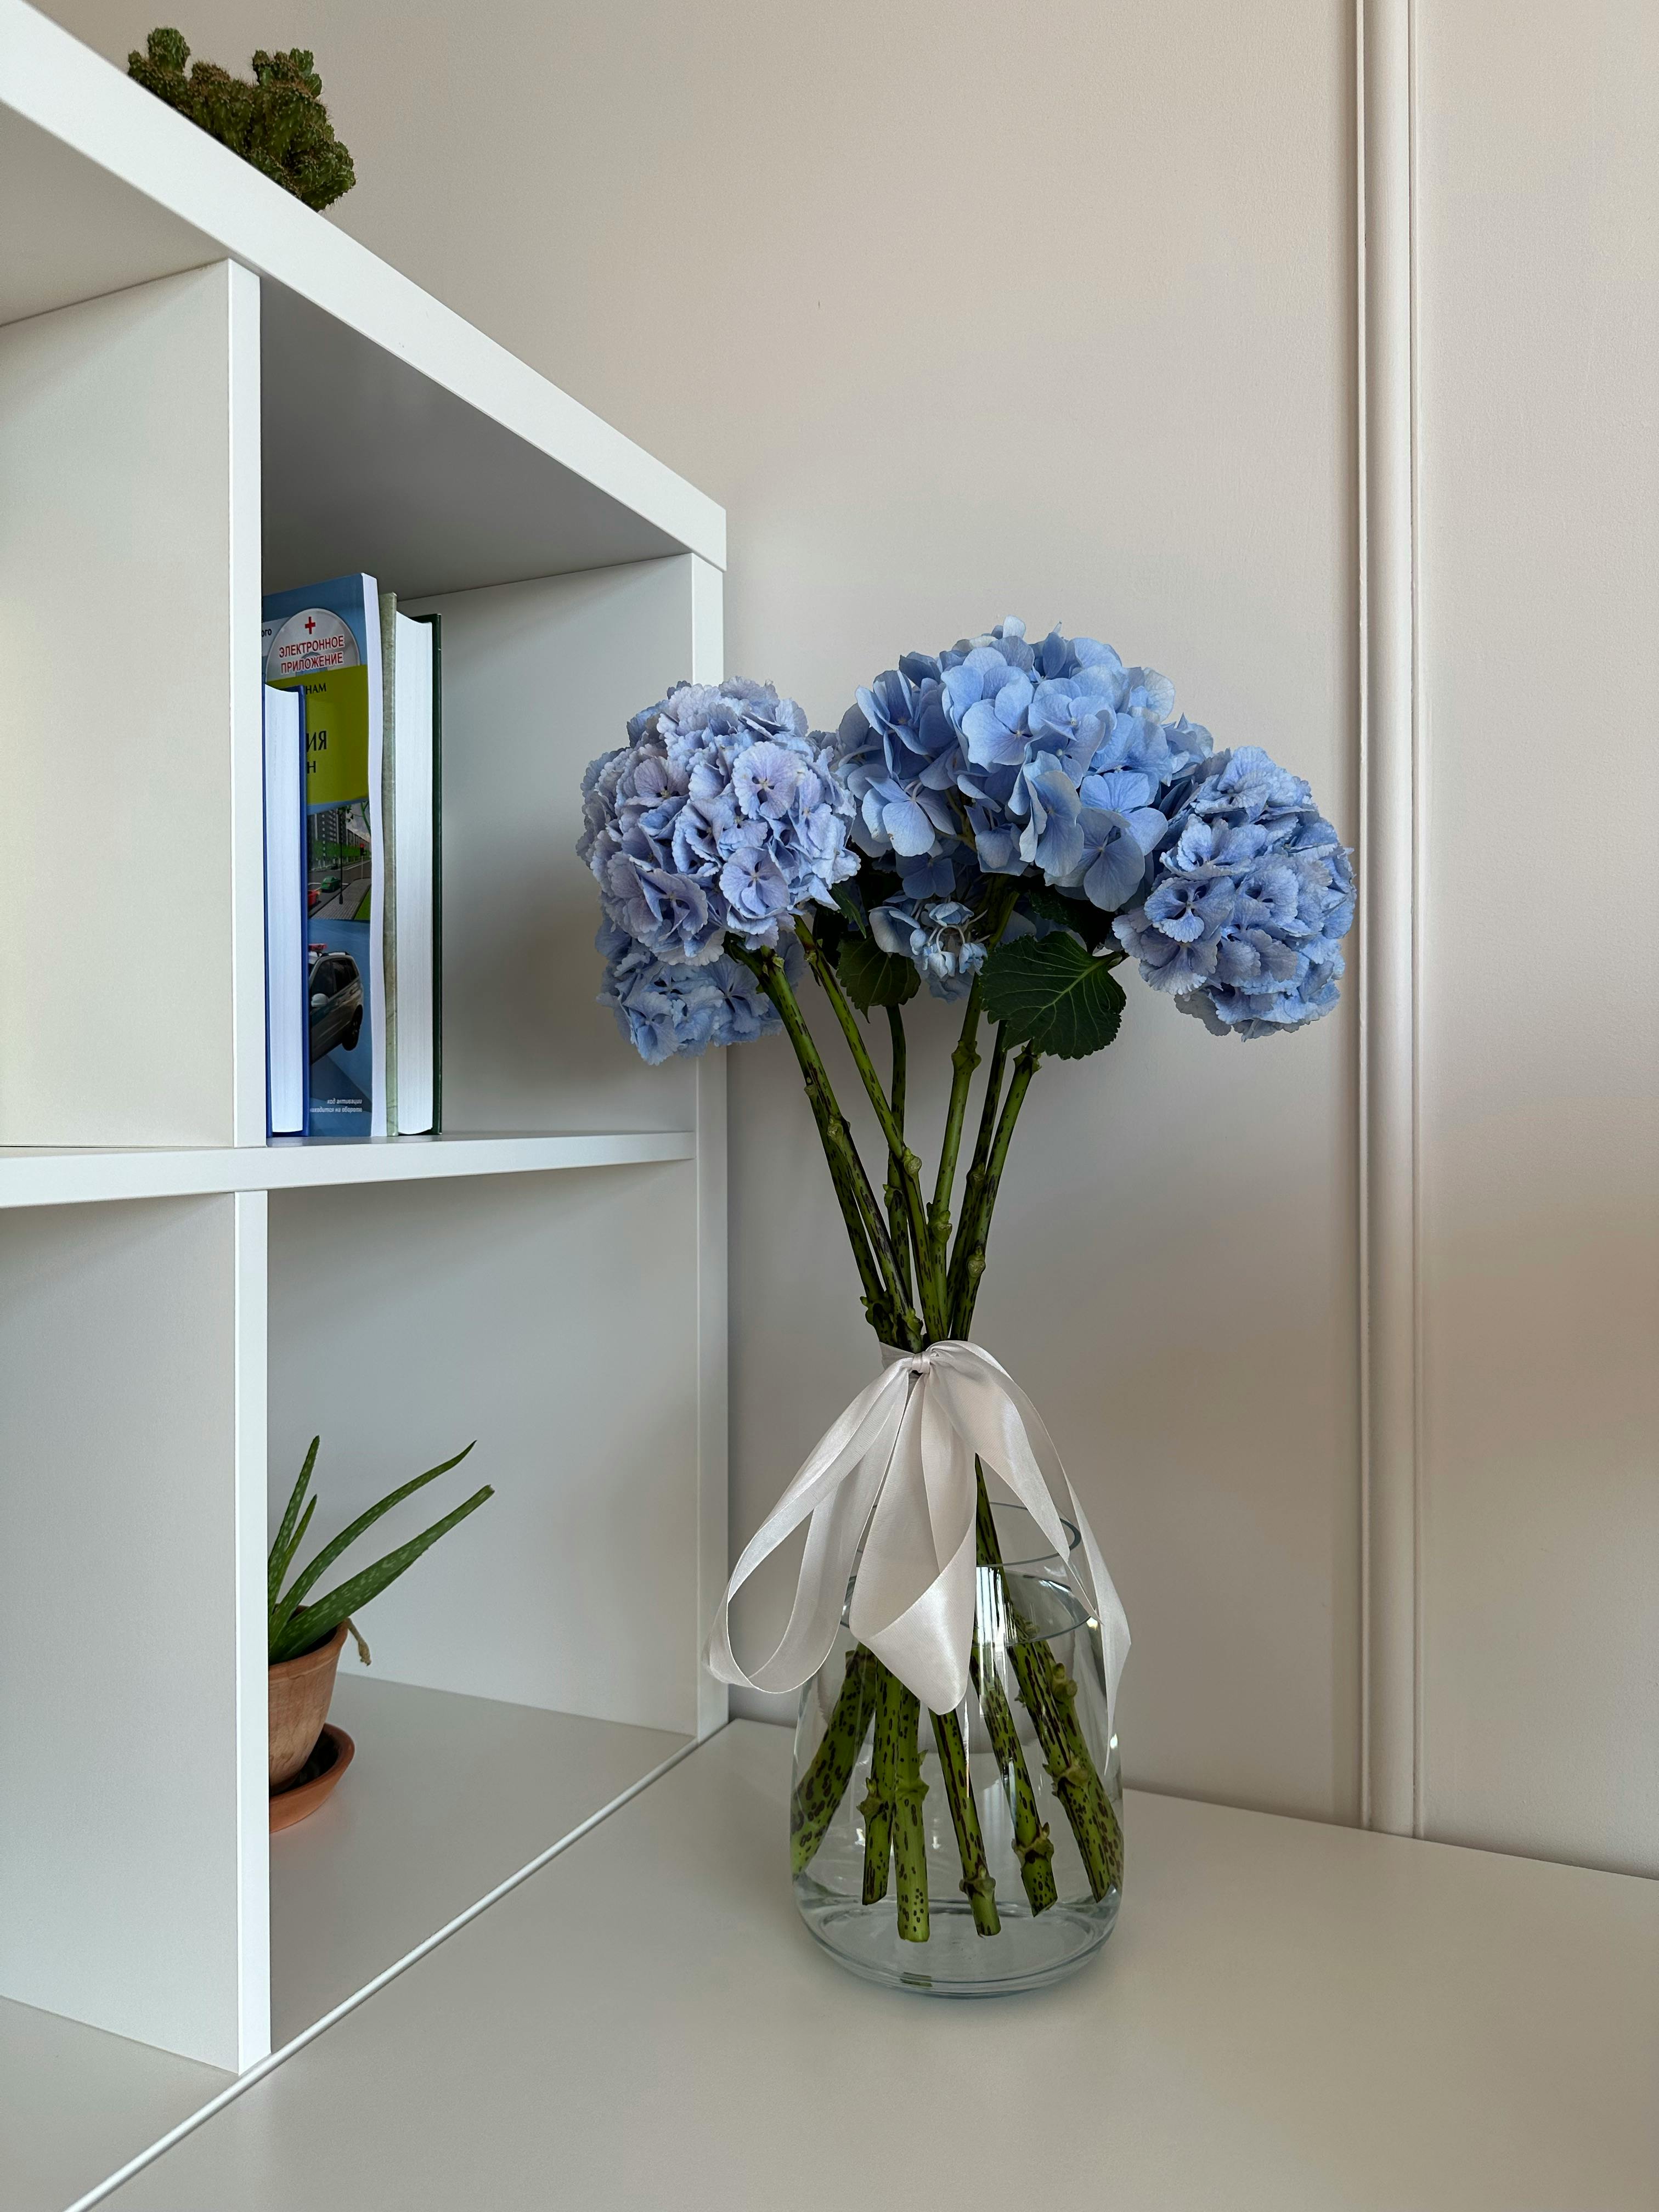 Vase with Flowers near White Wall and Shelves · Free Stock Photo